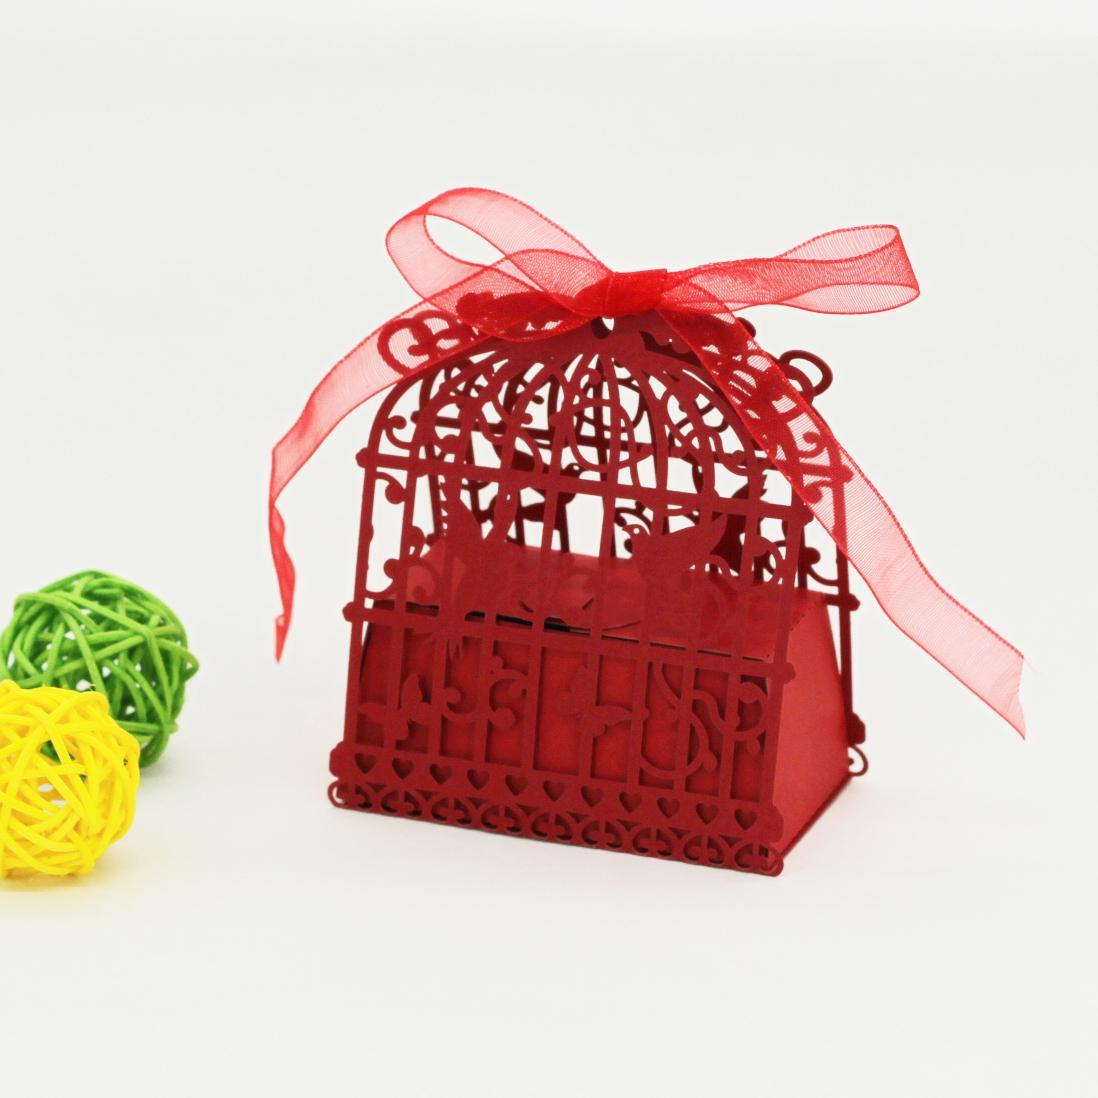 20PCS Bird Cage Laser Cut Gift Candy Box w/ Ribbon Wedding Party Favor Red